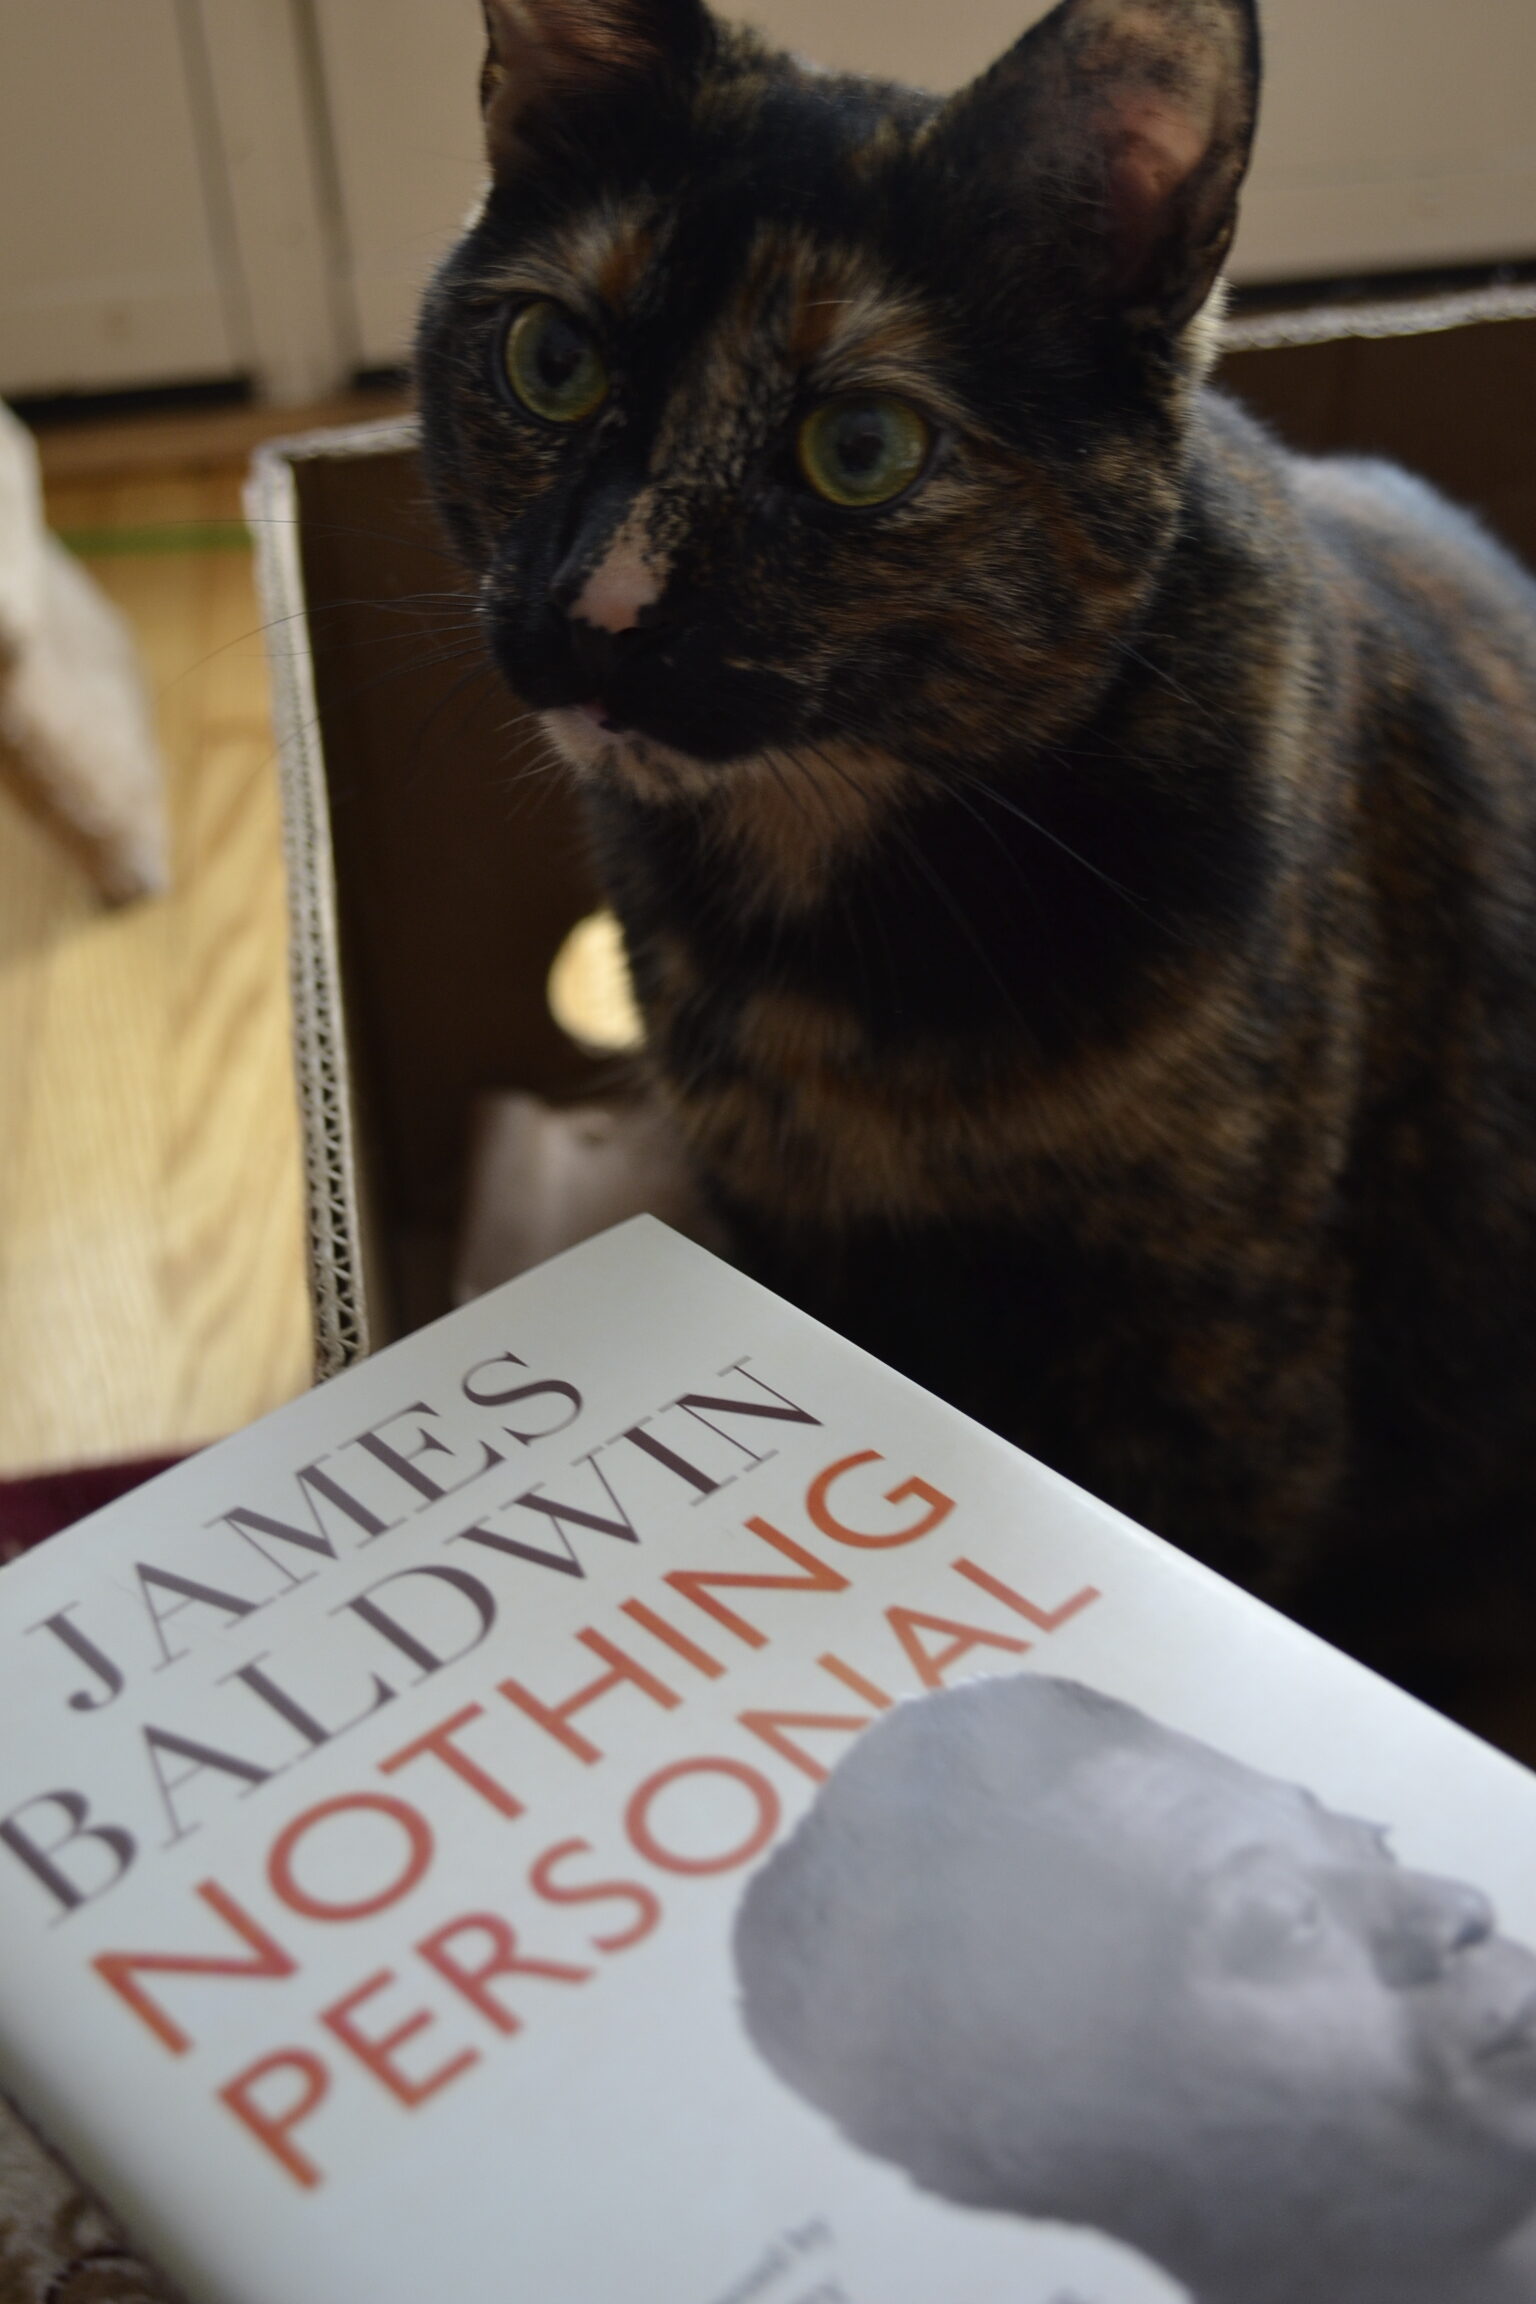 A tortoiseshell cat sits beside James Baldwin's Nothing Personal.